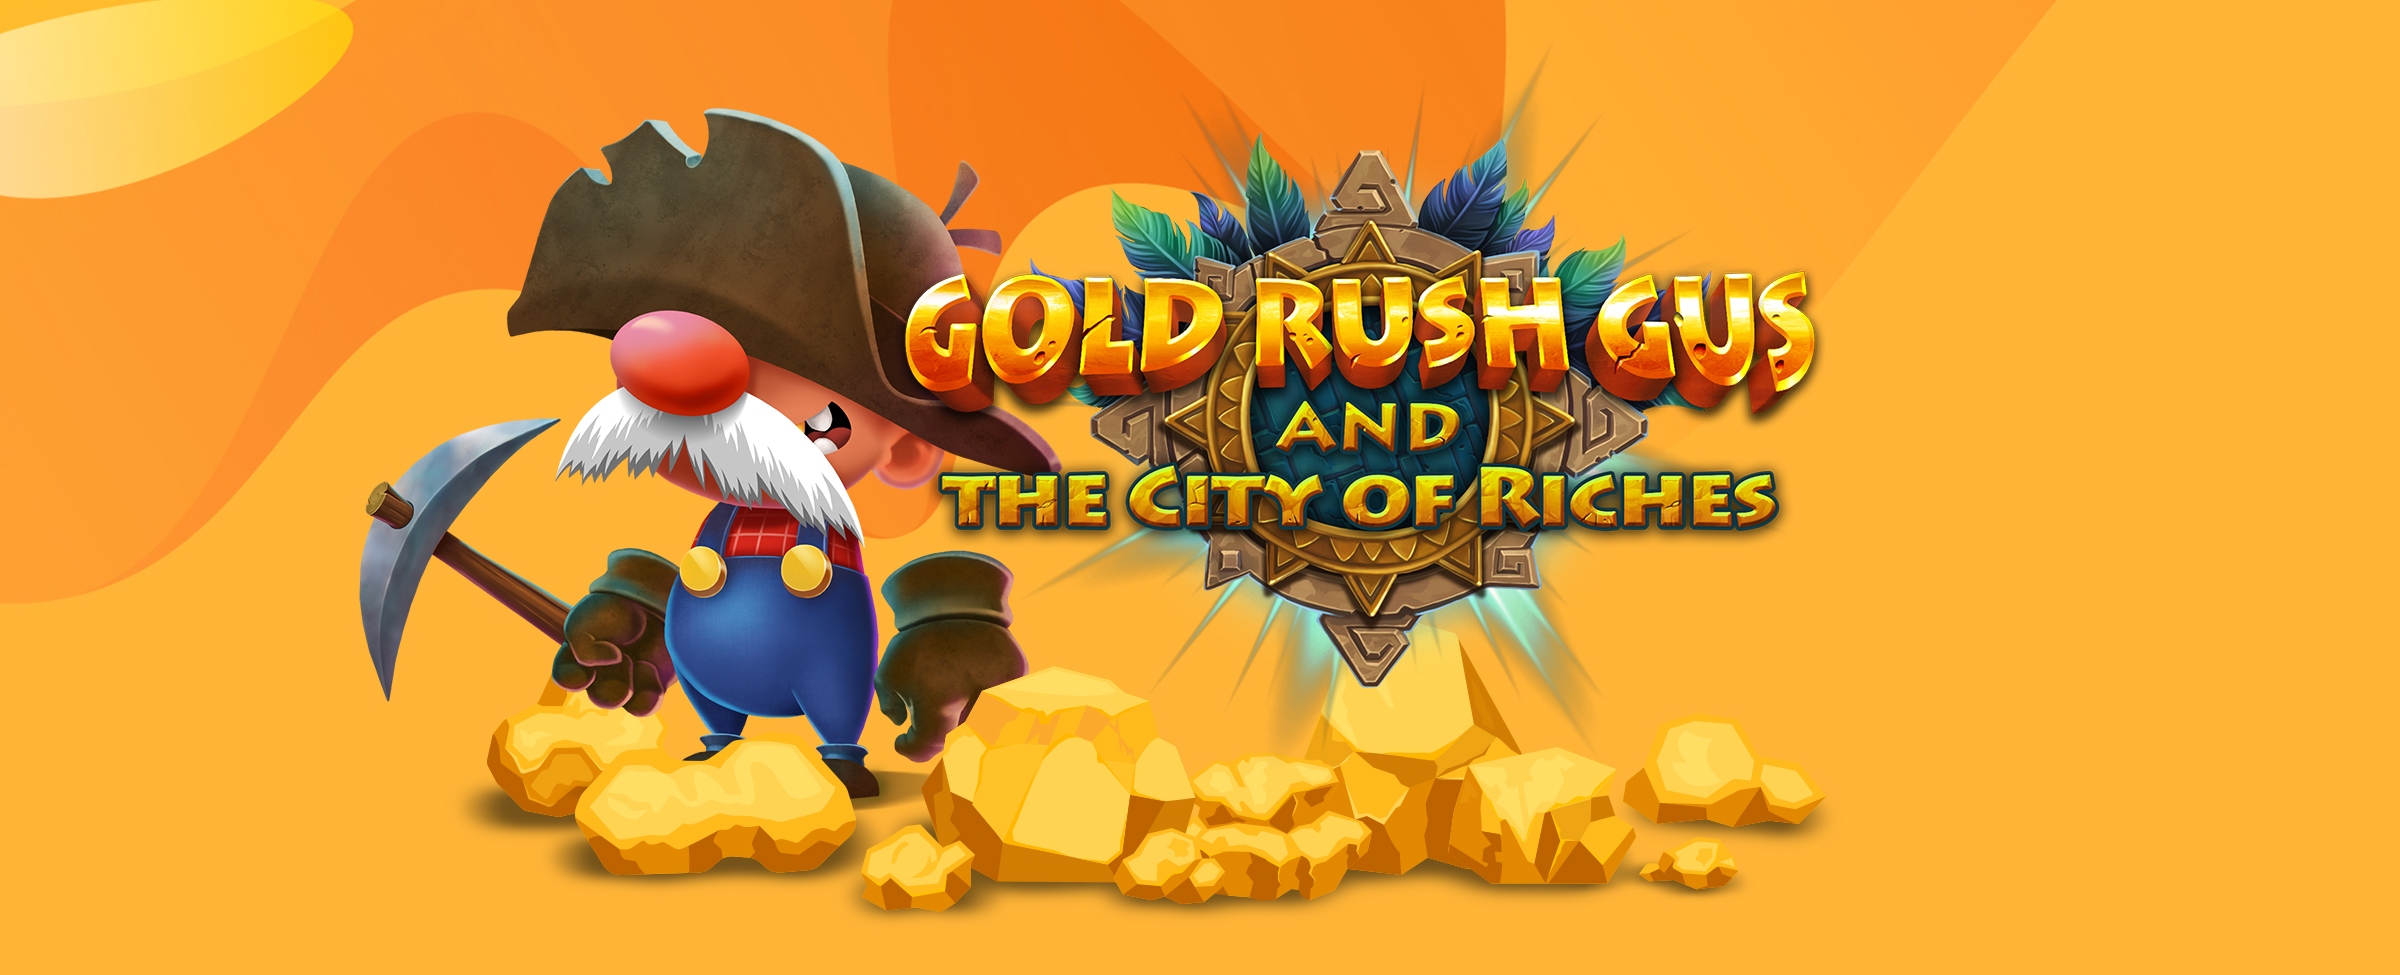 Our fun-loving players are so fond of Gus, that we went ahead and made a minty fresh version! Enter Gold Rush Gus and the City of Riches – your new go-to slots game!